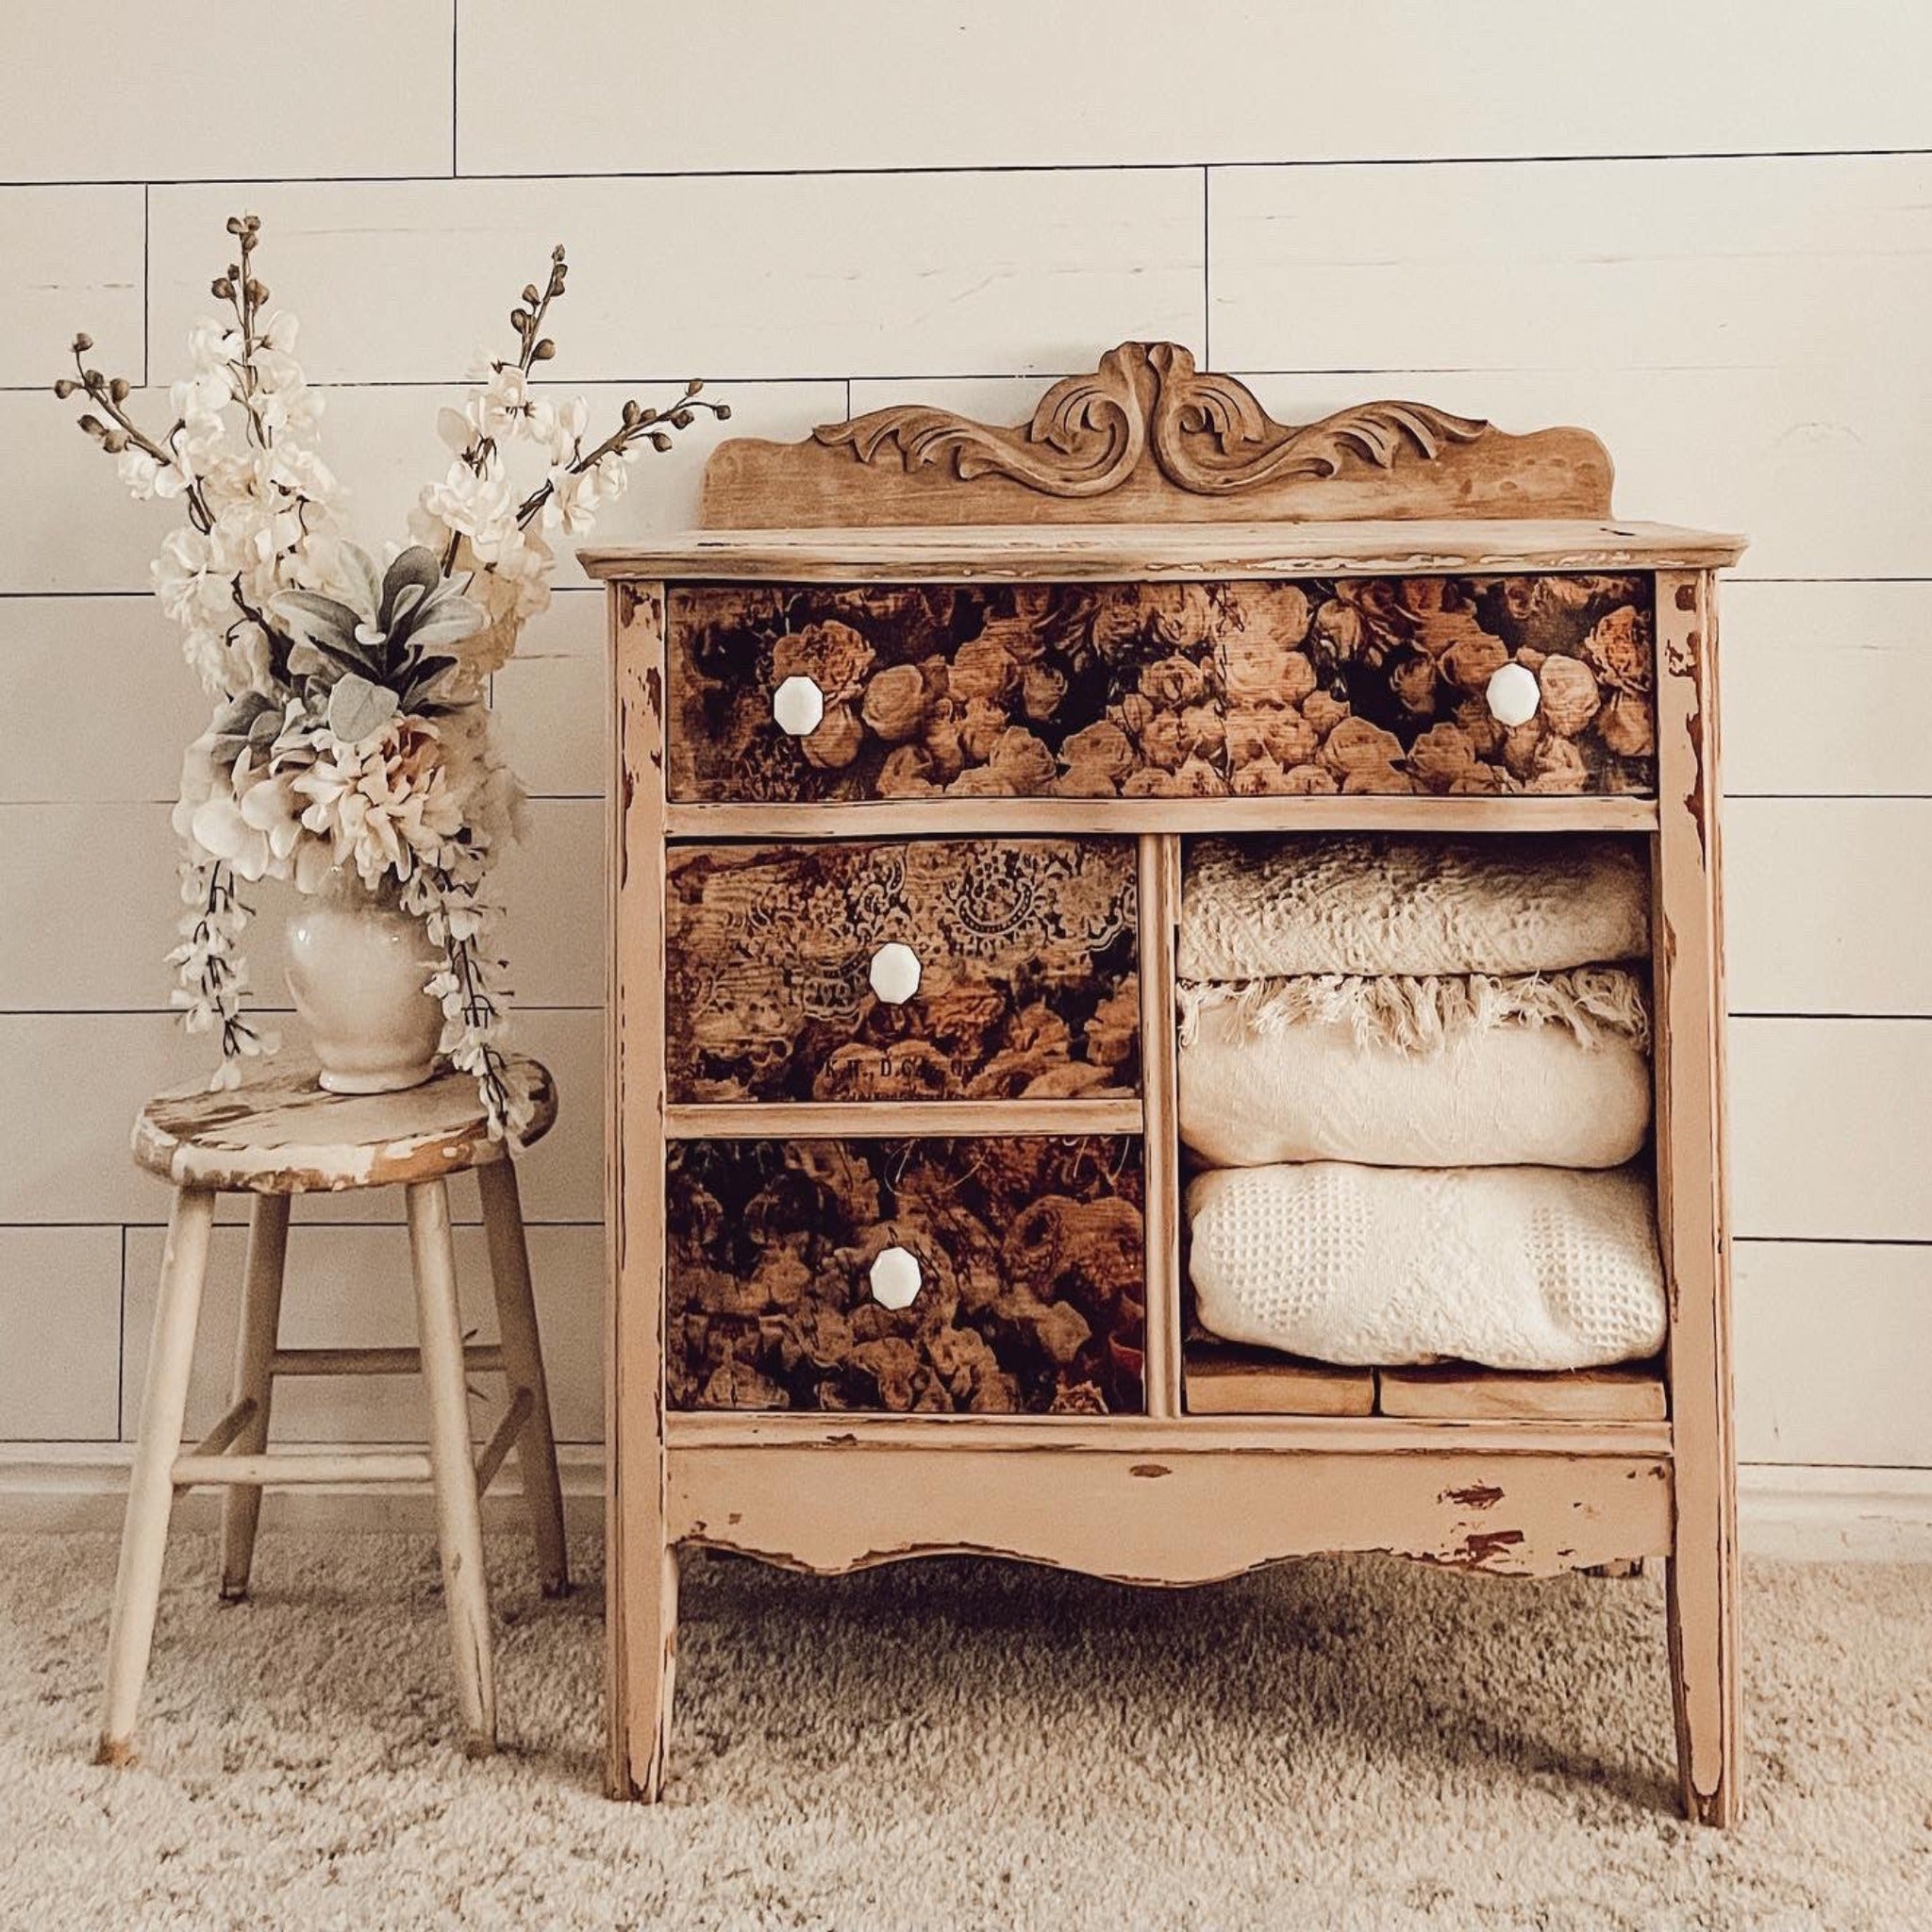 A vintage small dresser features ReDesign with Prima's Beautiful Dream tissue paper on its 3 drawers. The photo has a sepia color tone to it.